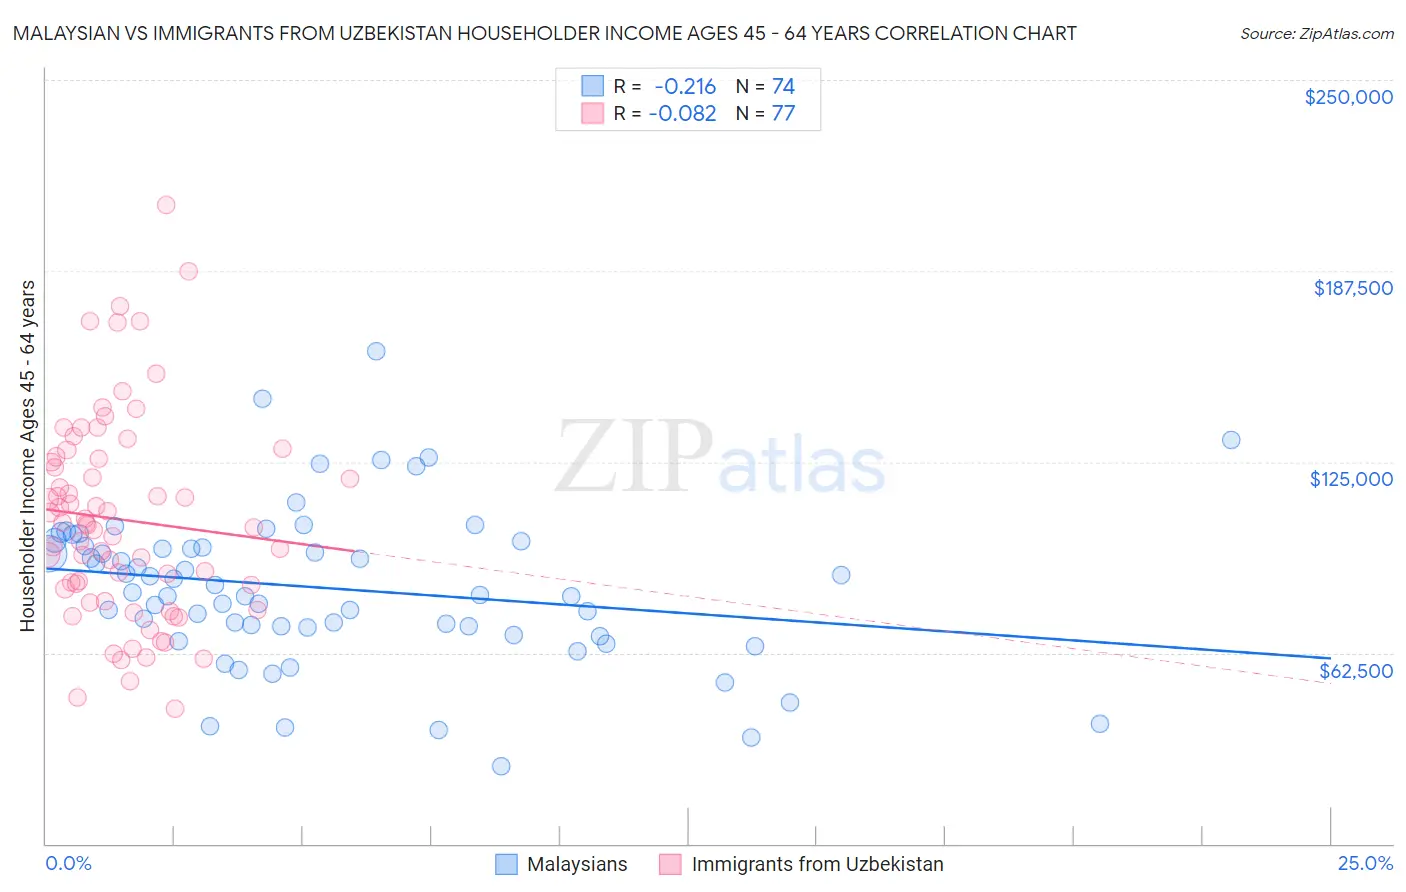 Malaysian vs Immigrants from Uzbekistan Householder Income Ages 45 - 64 years